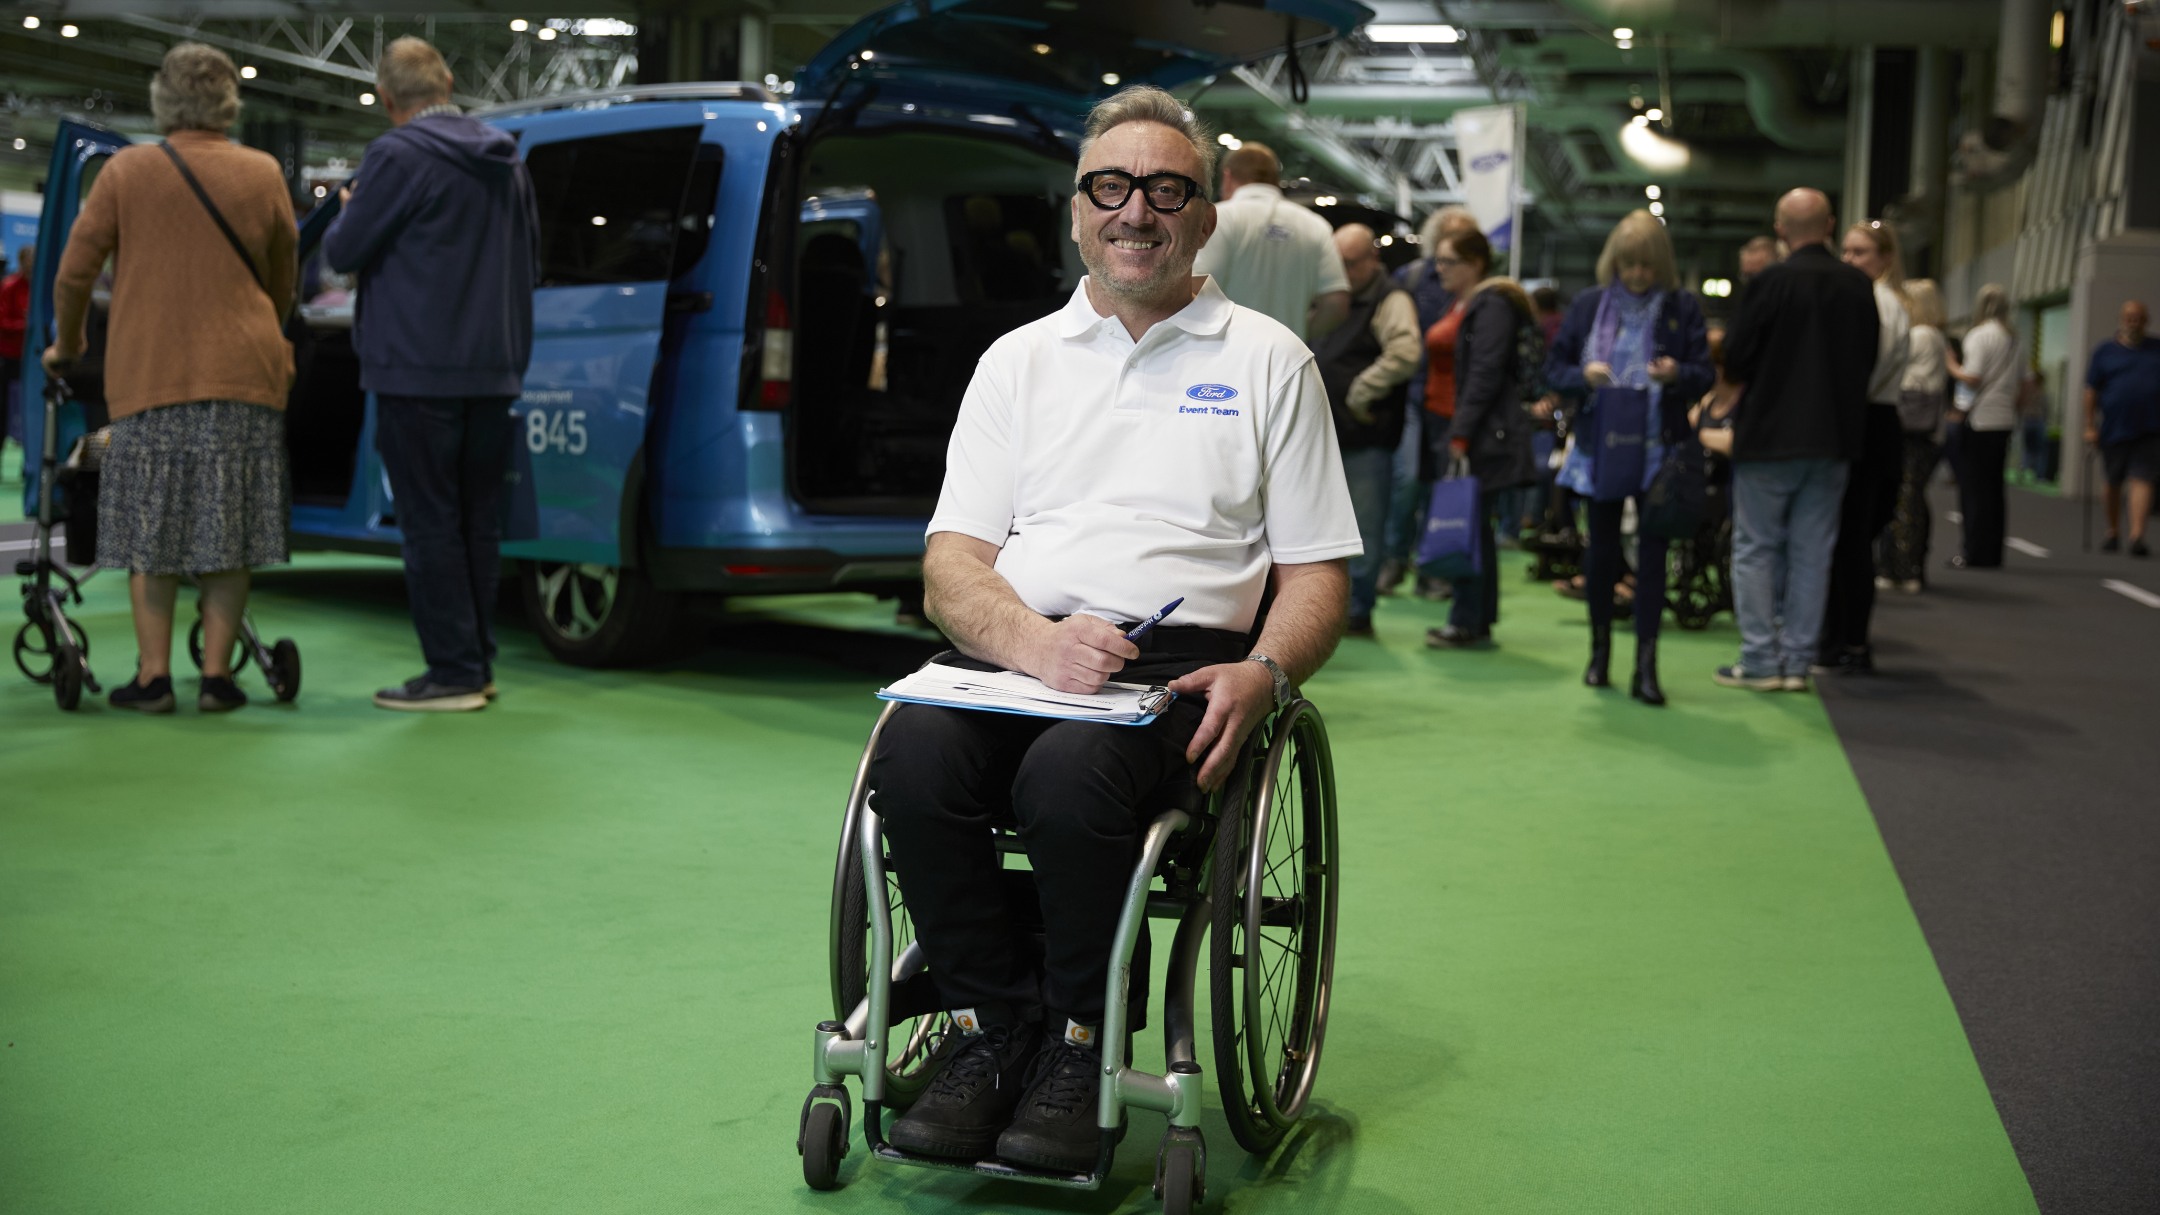 Smiling Ford event organiser sitting in a wheelchair